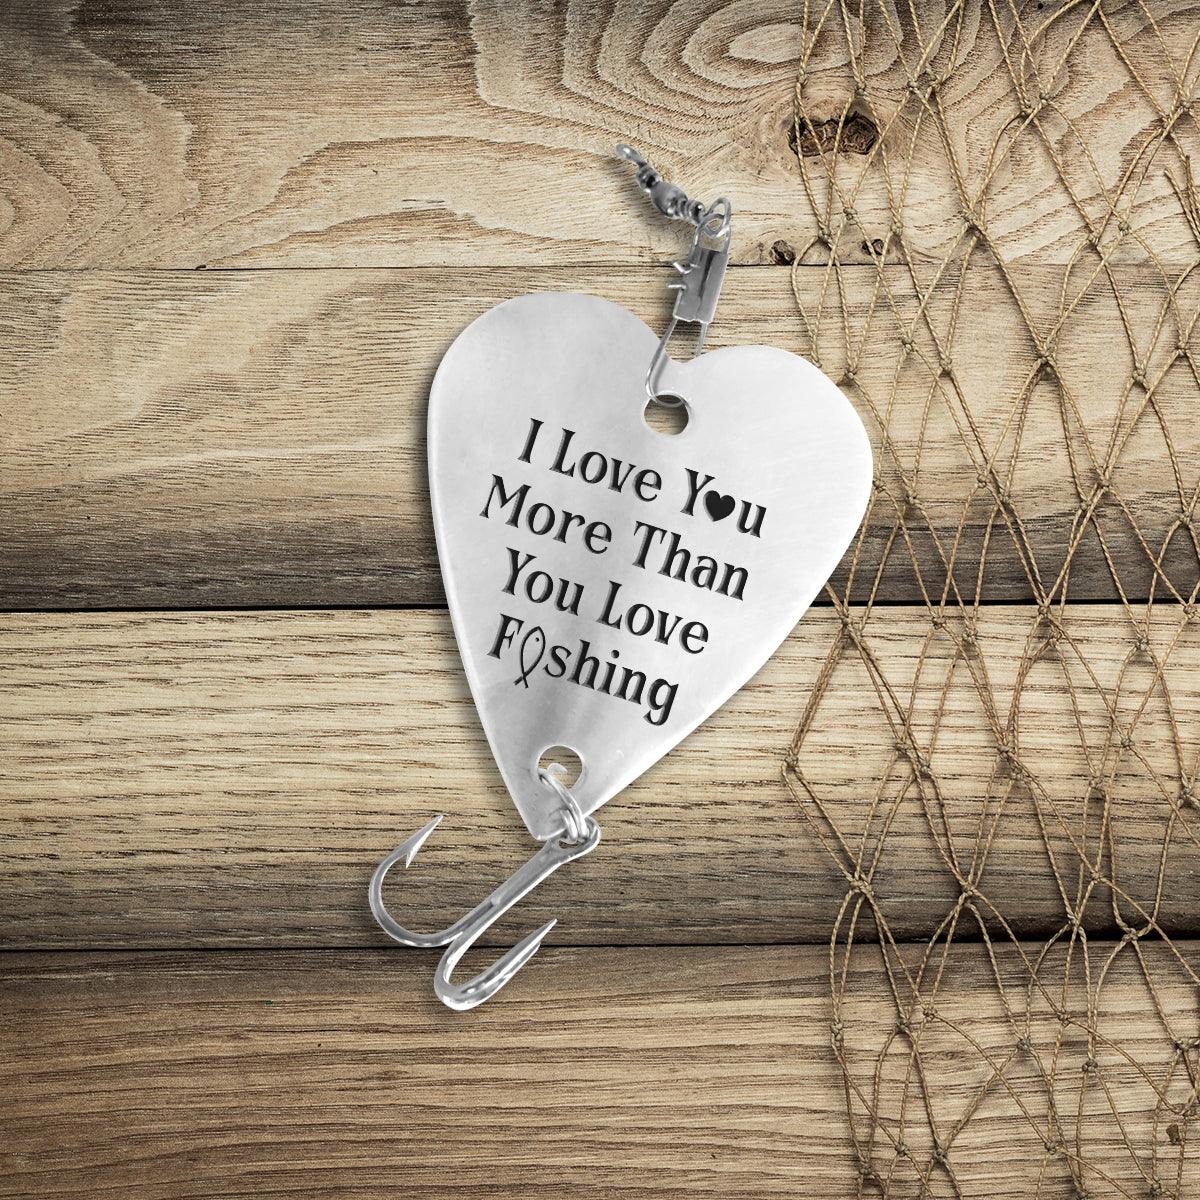 Heart Fishing Lure - Fishing - To My Man - I Love You More Than You Lo -  Gifts Holder